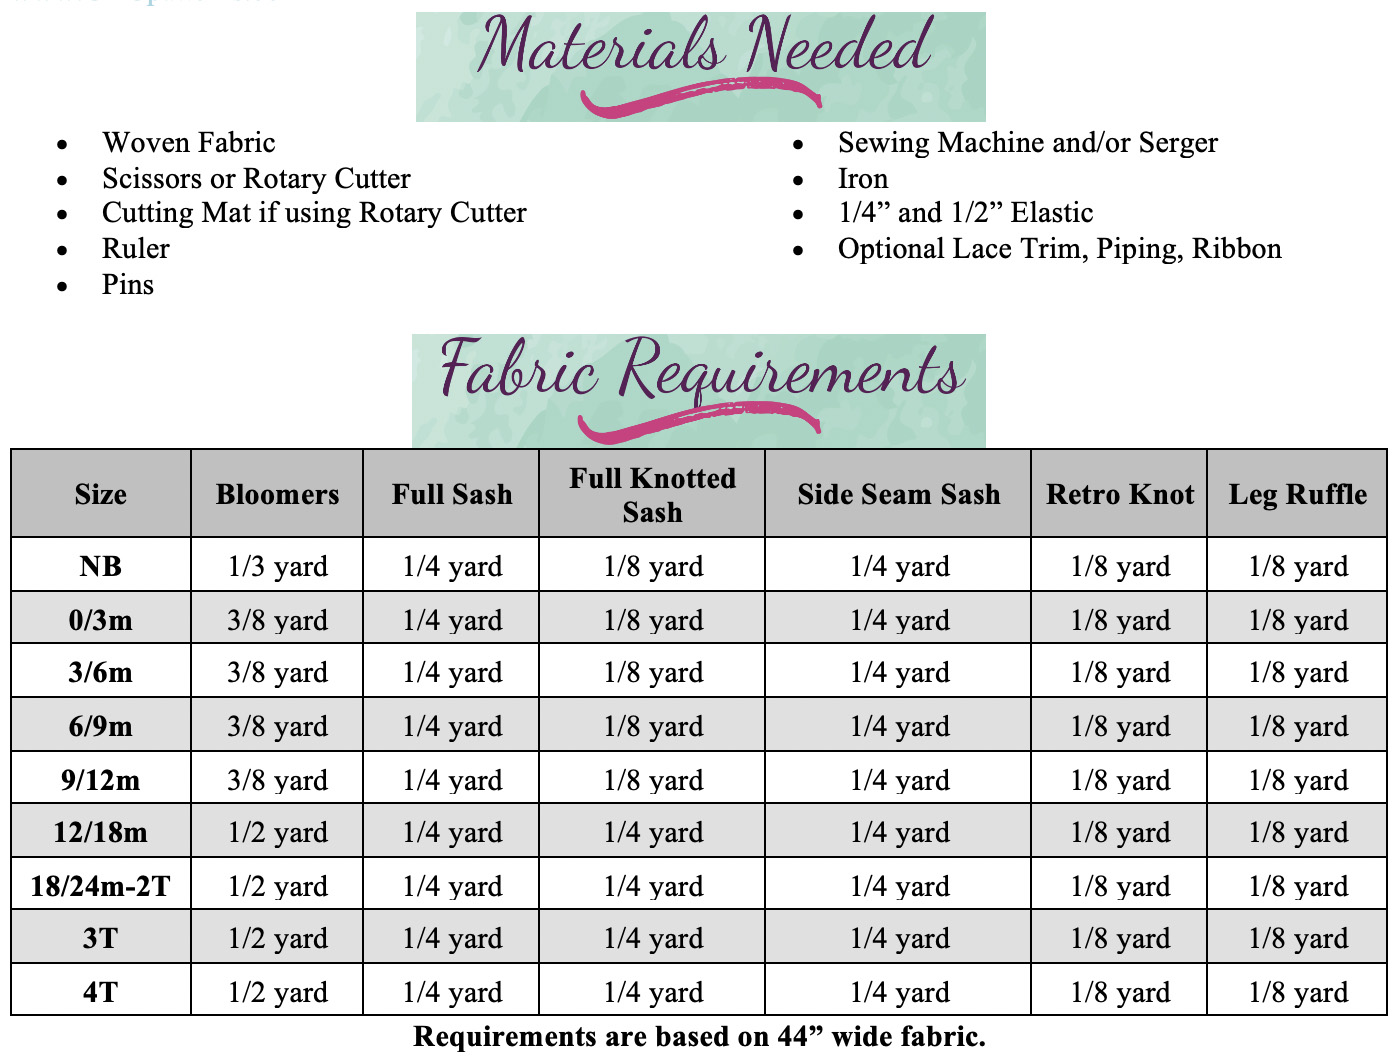 How Big Is A Yard Of Fabric {Free Comparisons & Charts}